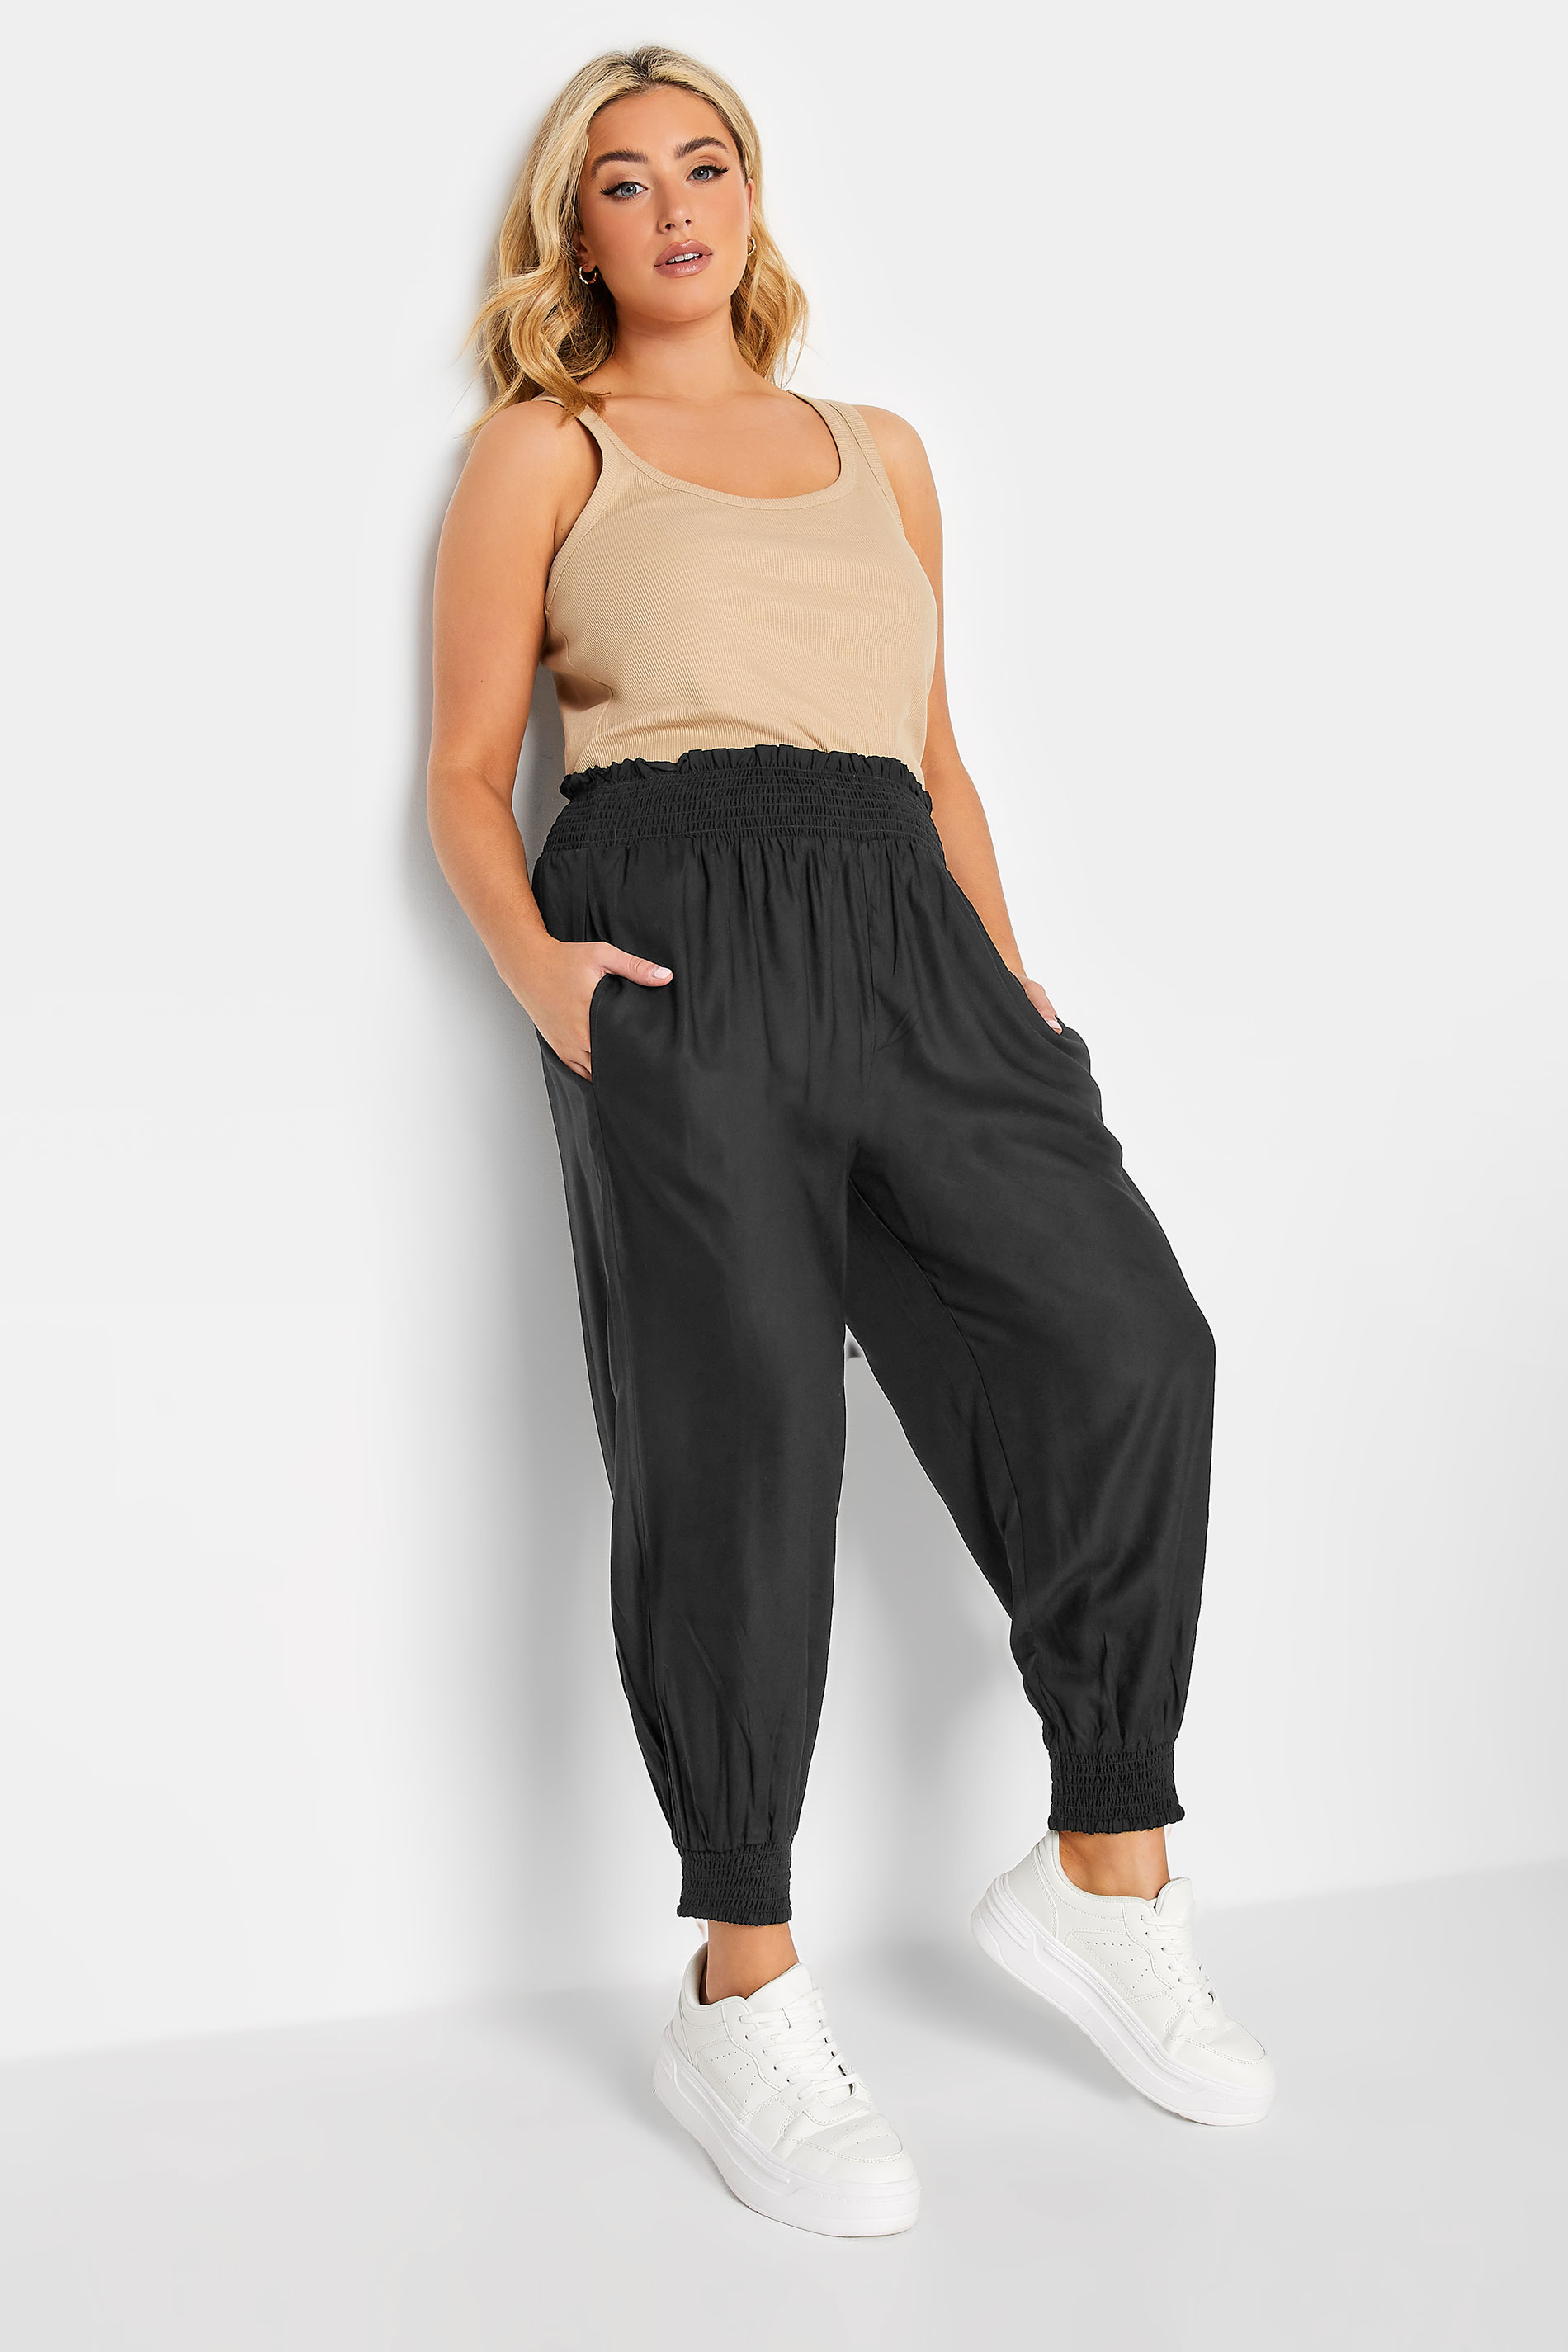 jc Fashion Bamboo Harem Trousers / Yoga Trousers at Rs 450/piece in Jaipur